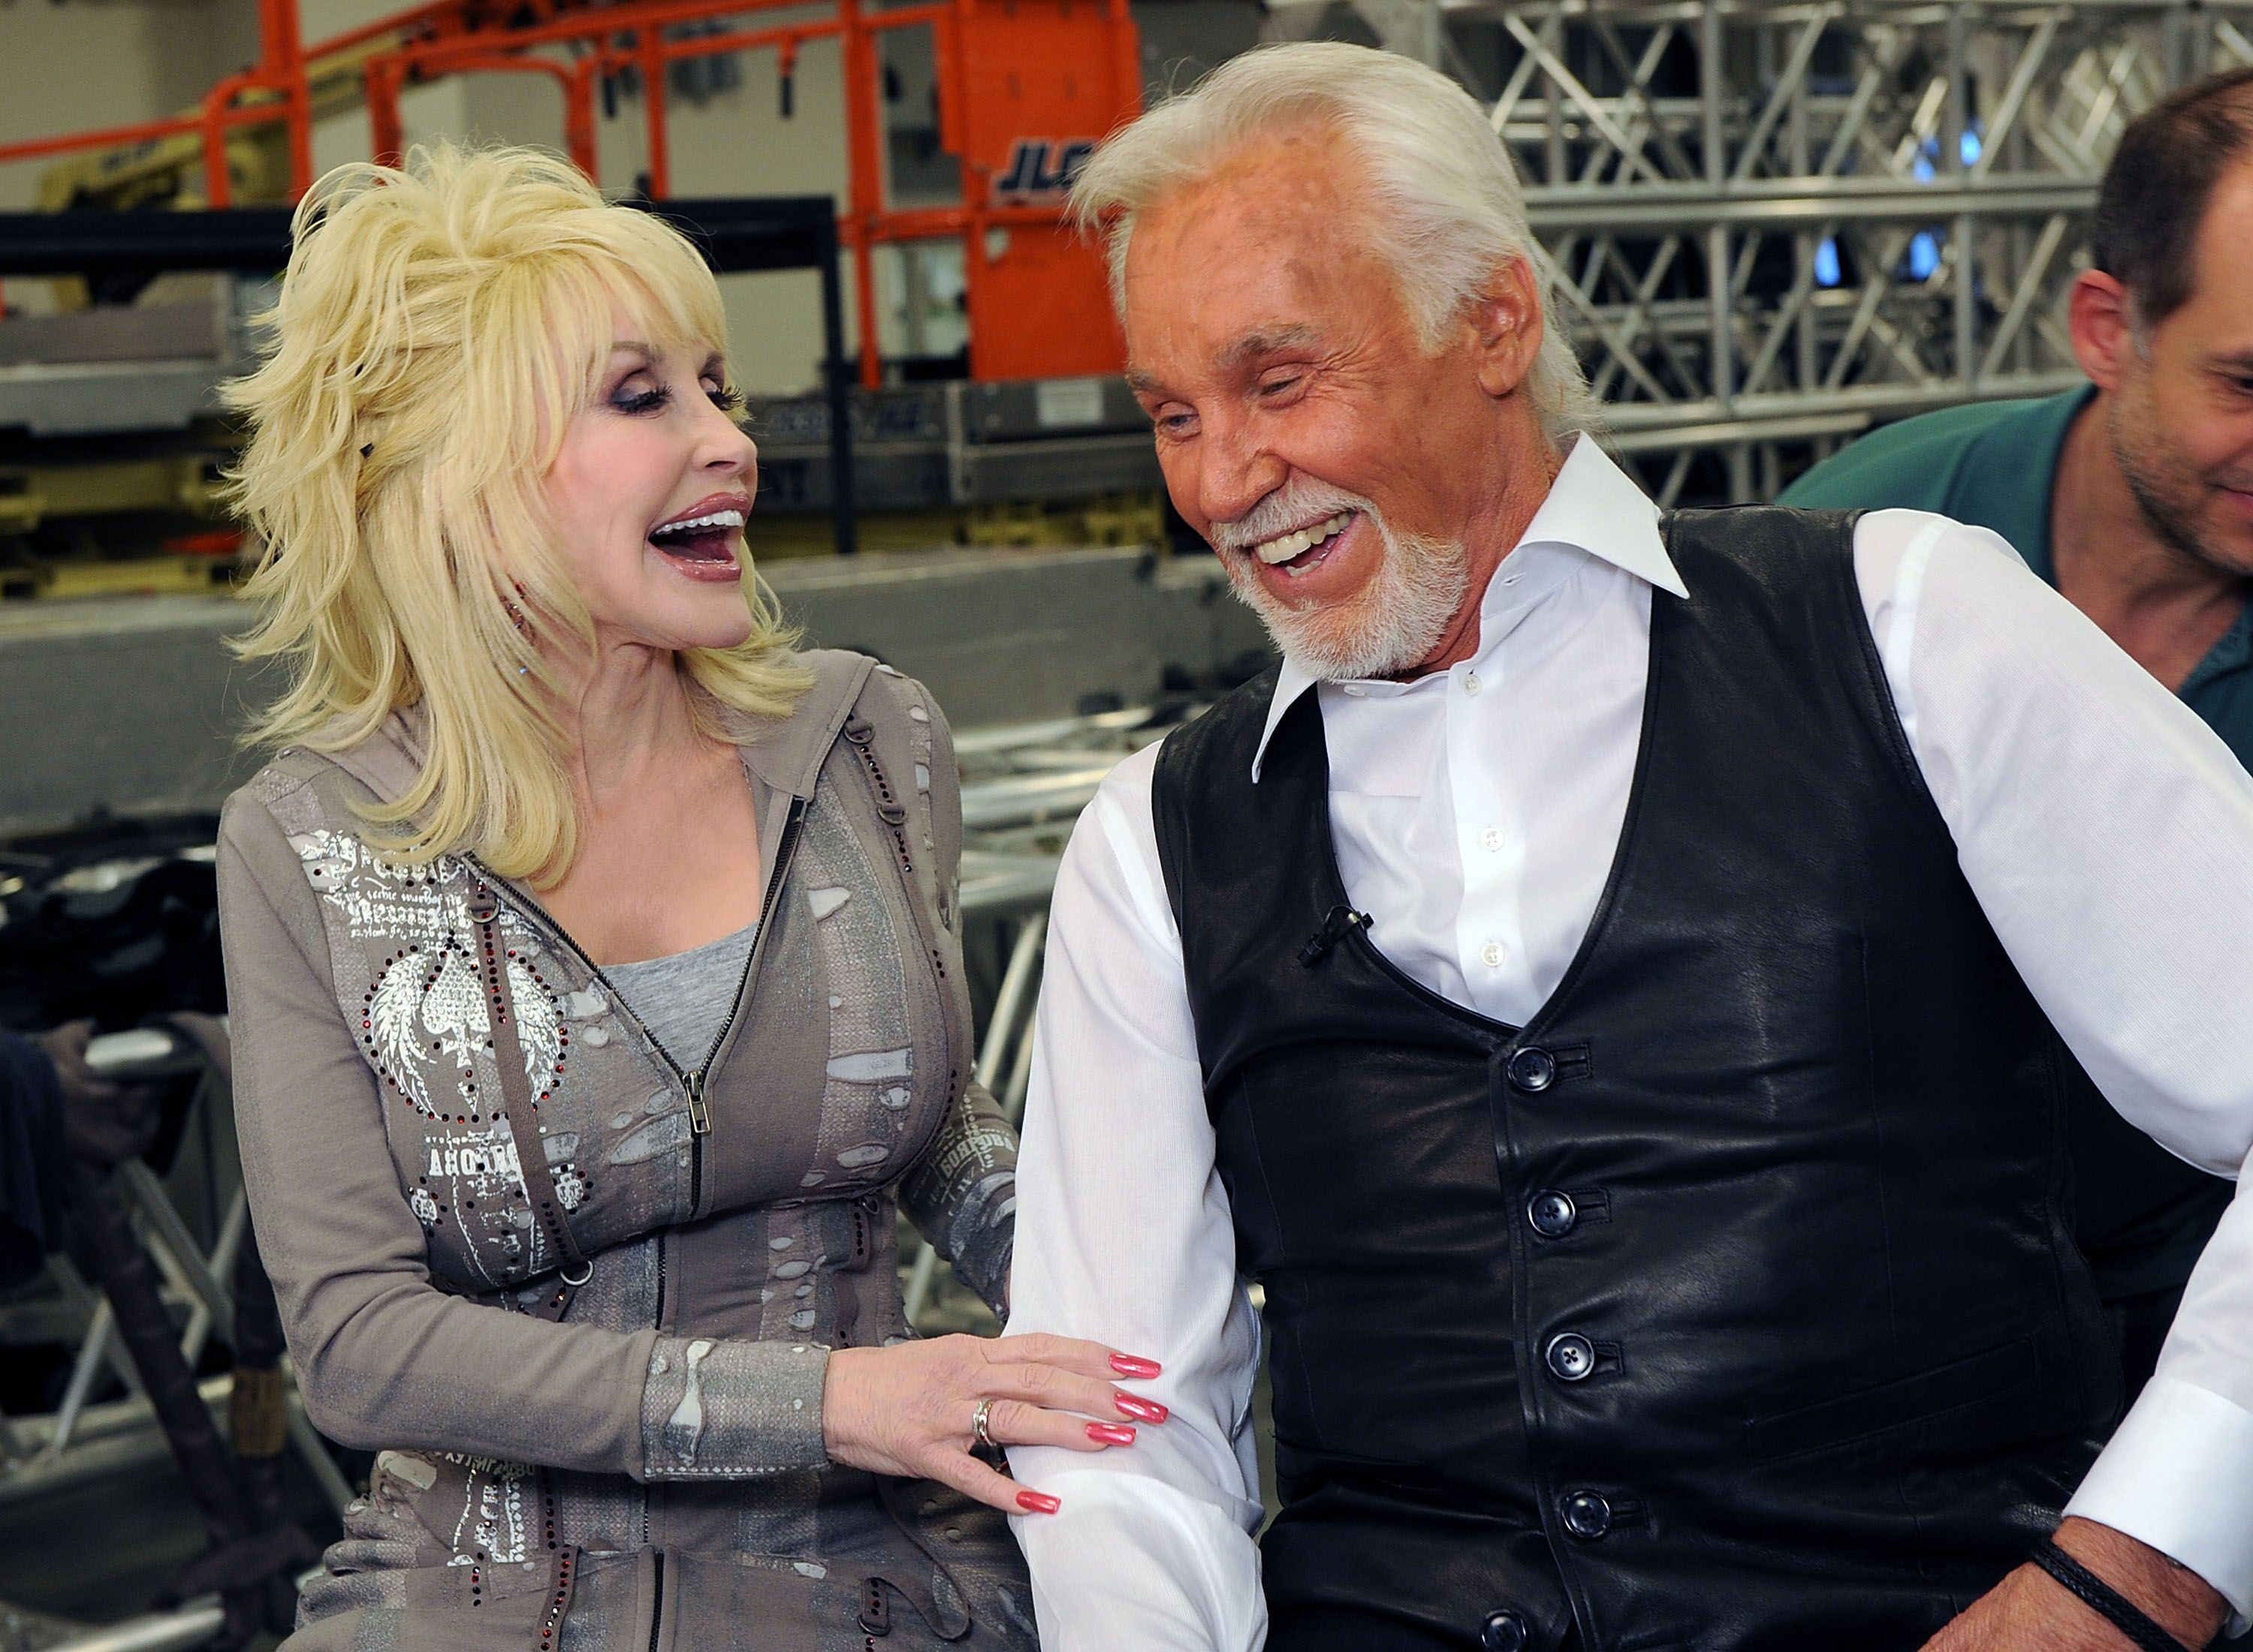  Dolly Parton and Kenny Rogers at the "Kenny Rogers: The First 50 Years" show in 2010 | Source: Getty Images